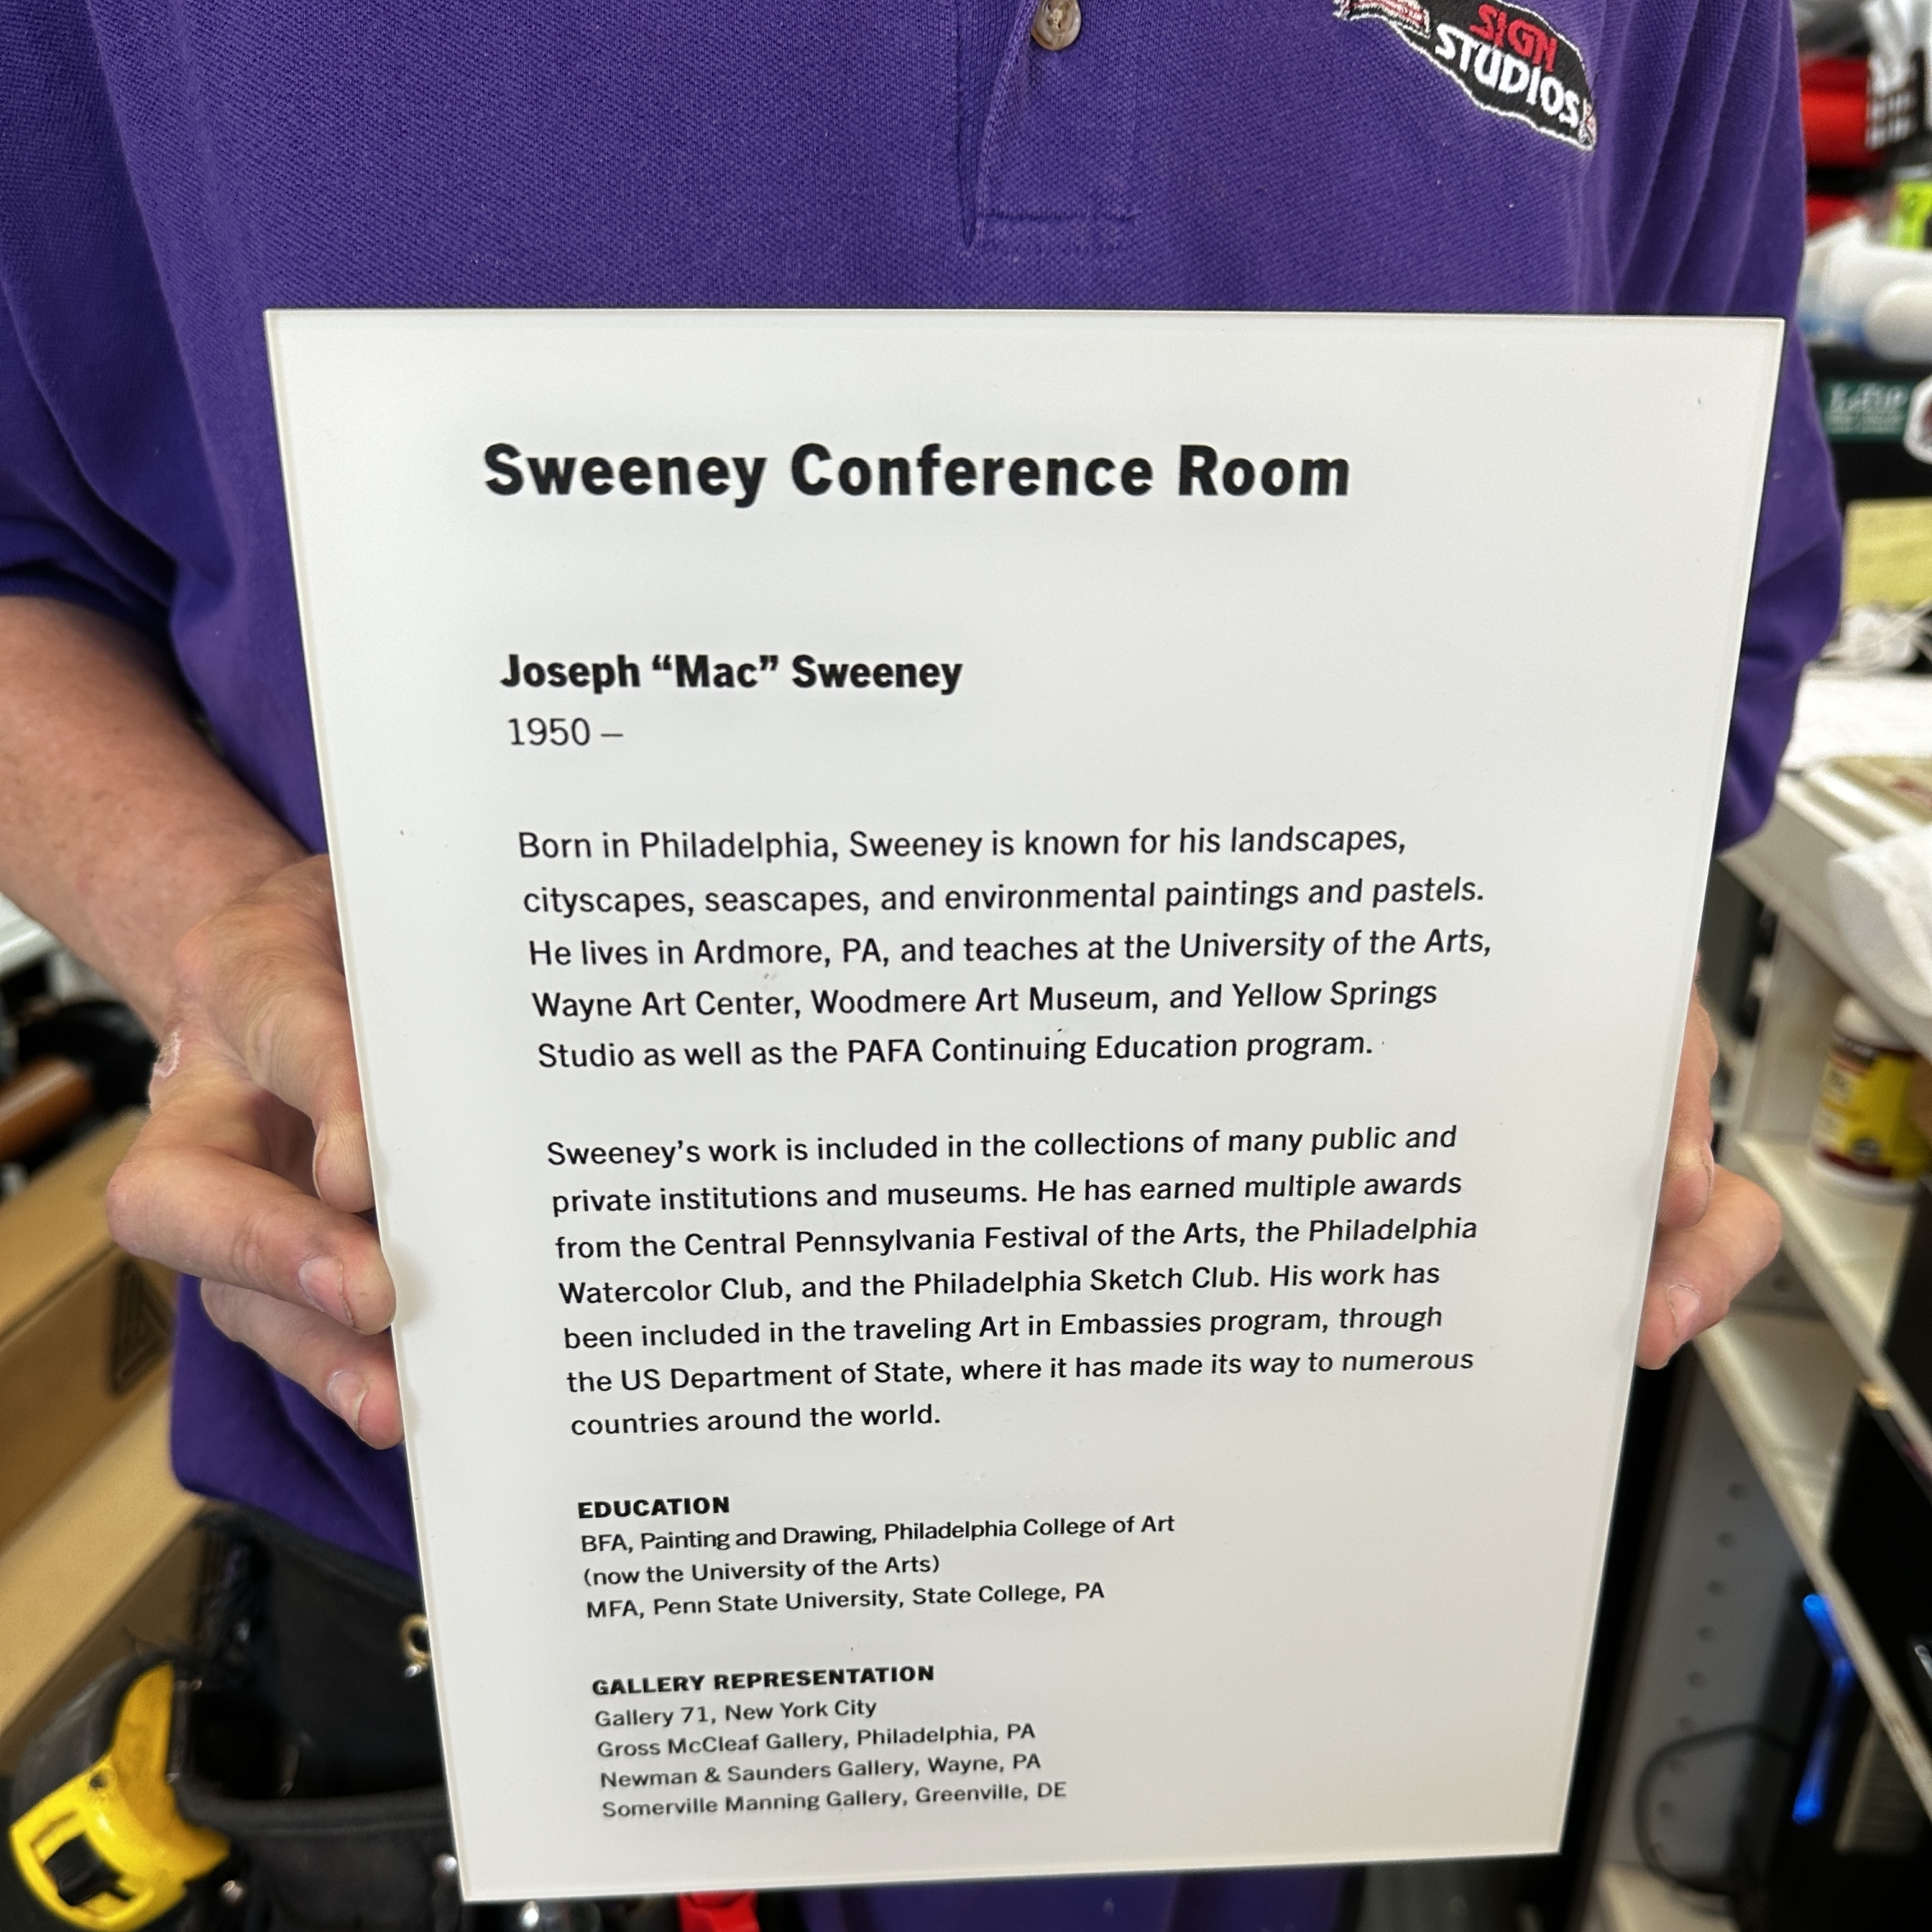 Sweeney Conference Room